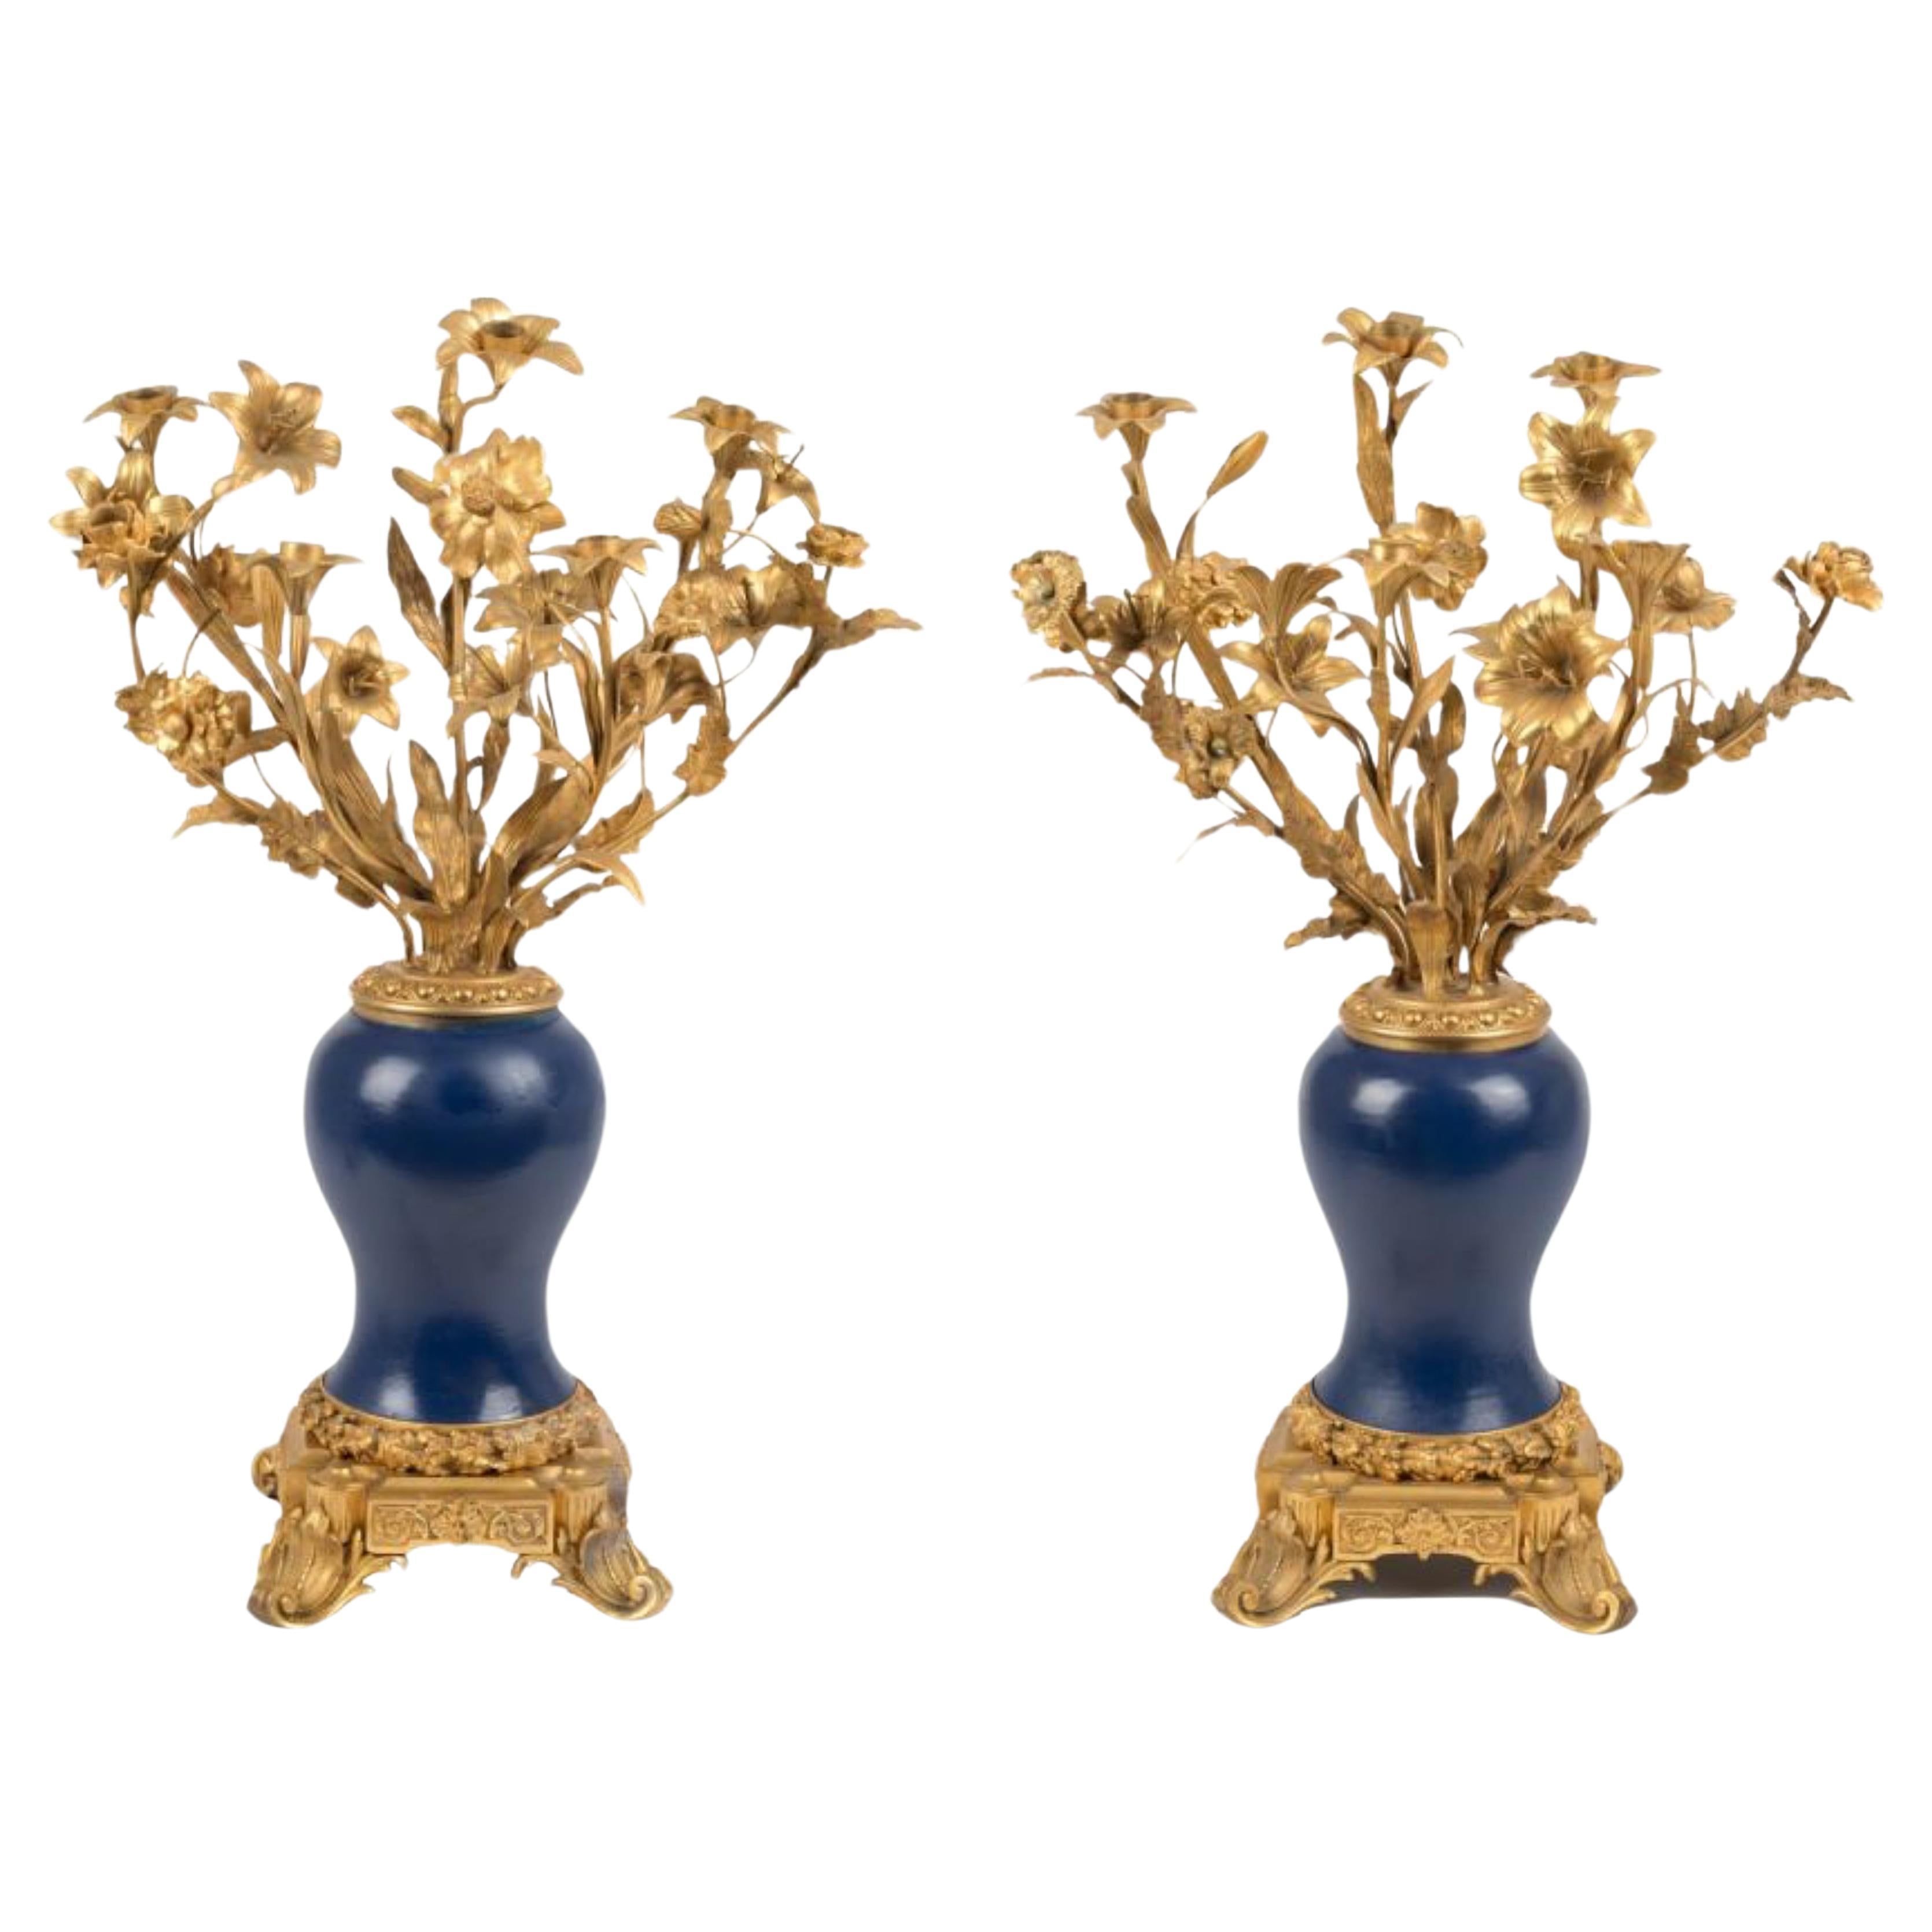 Magnificent Pair of 19th Century French Candelabra For Sale